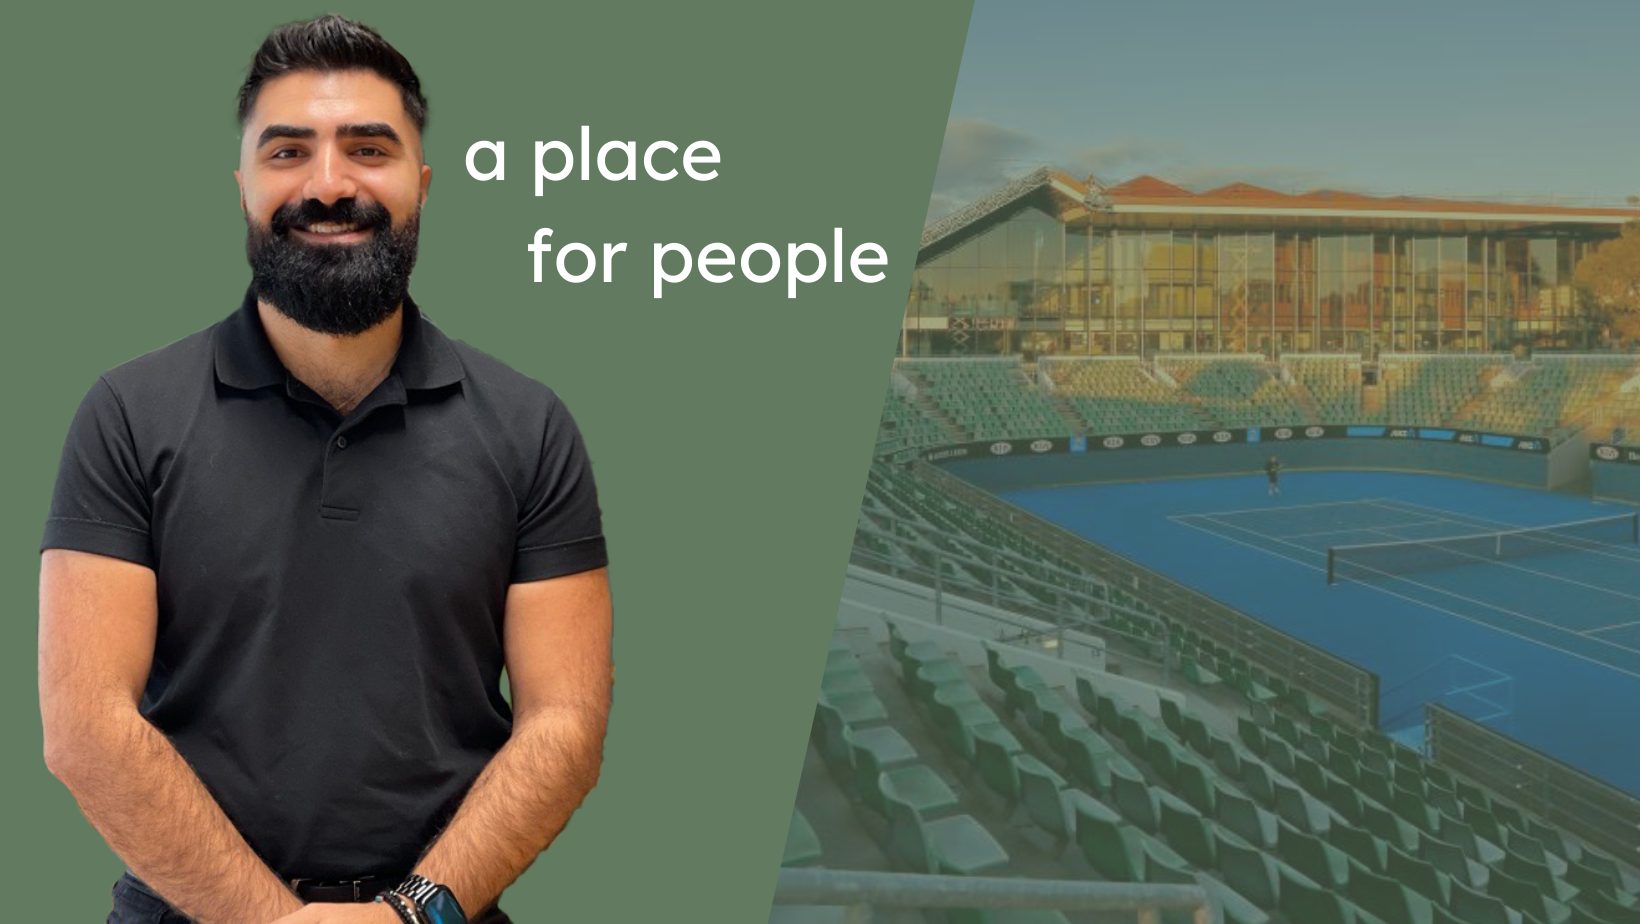 Profile of Ramzi with image of tennis court at melbourne Park. Text reads: a place for people.